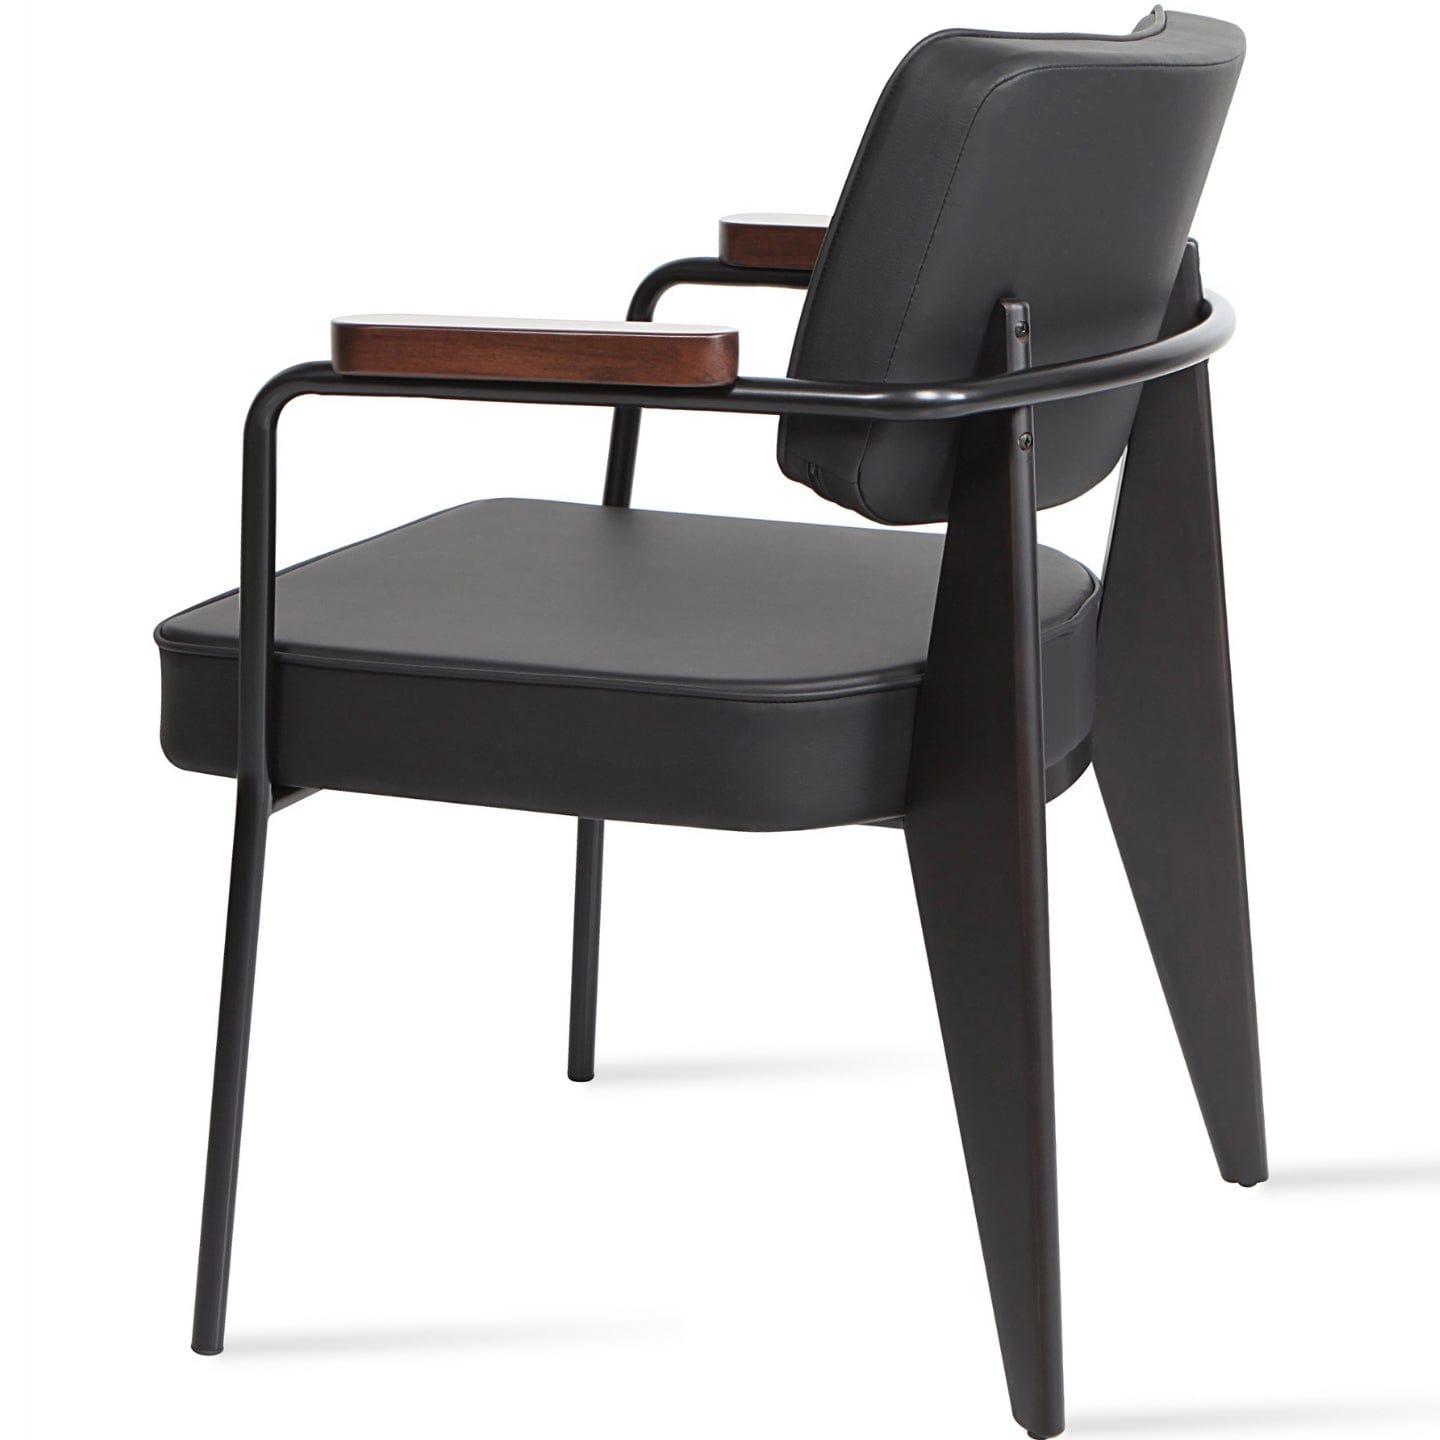 Soho Concept prouve-armchair-black-metal-base-faux-leather-seat-dining-chair-in-black